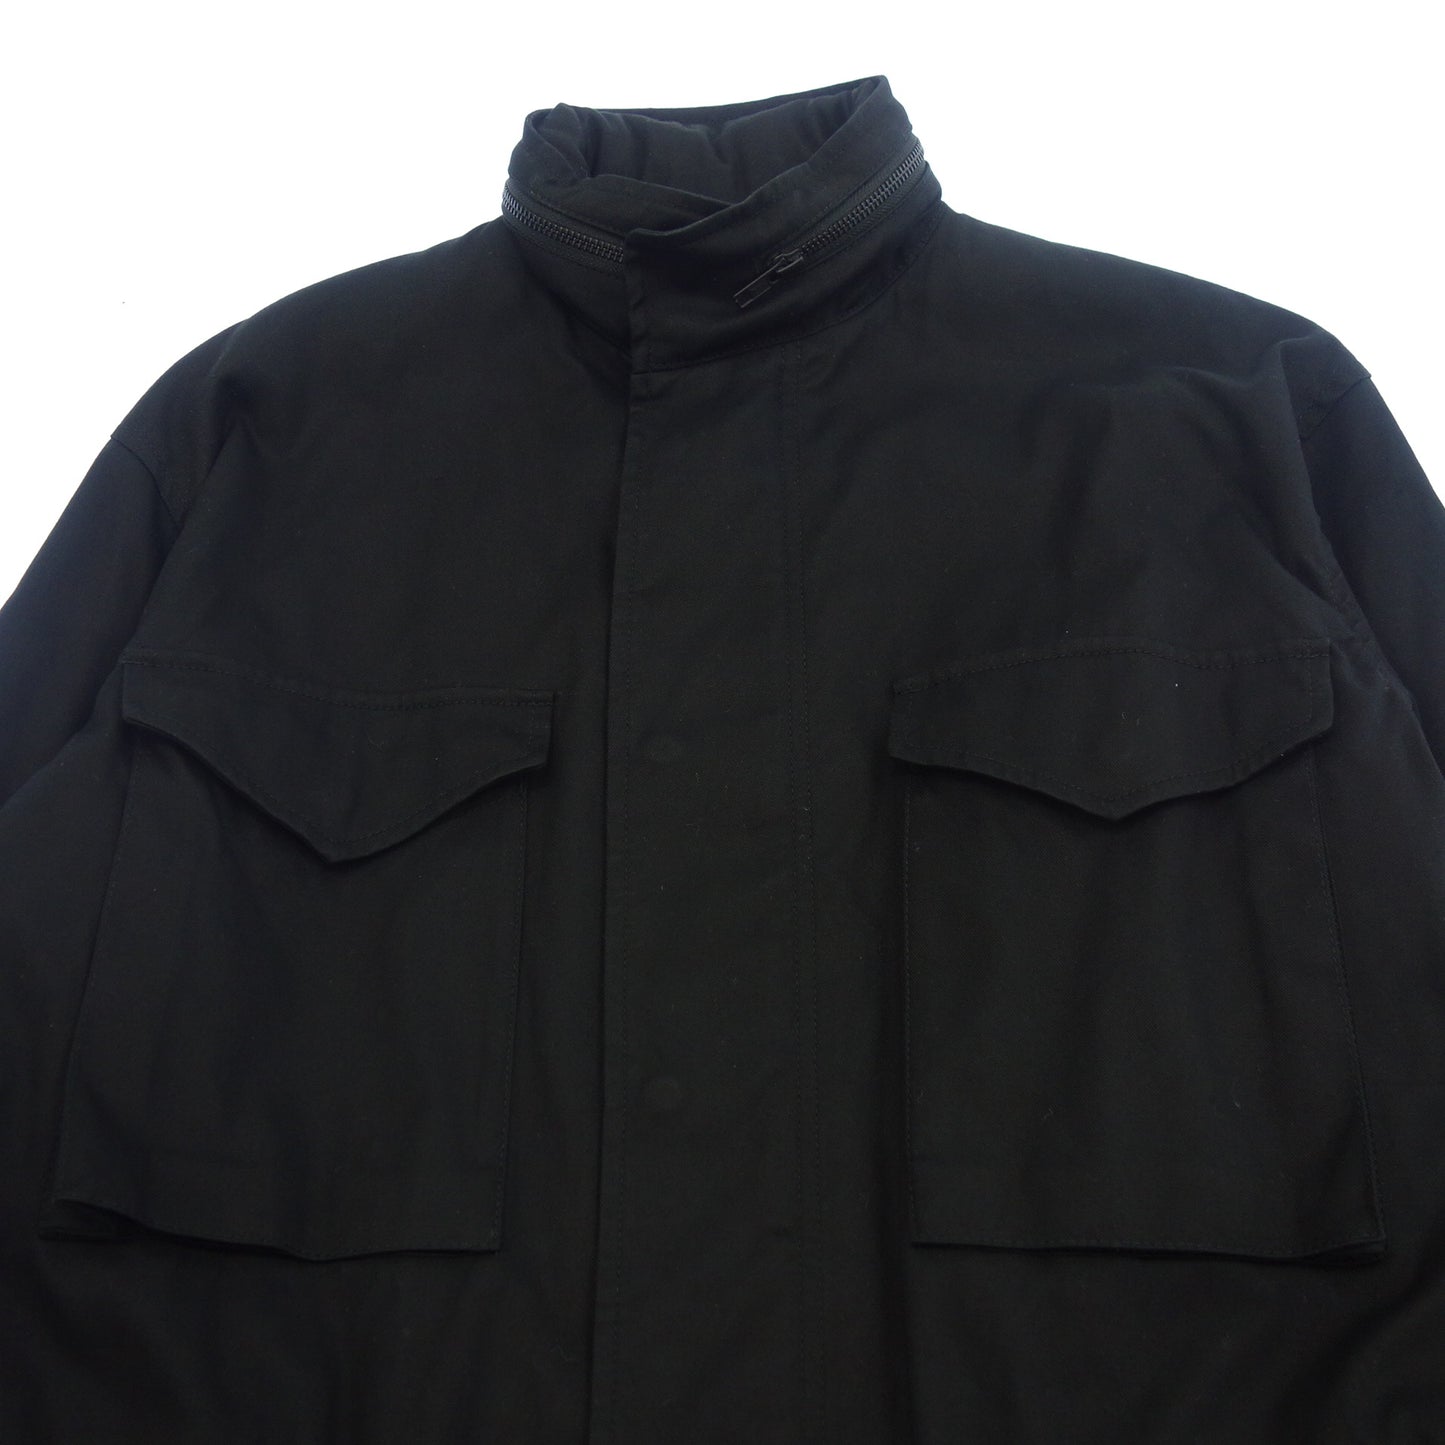 Good condition◆Wise zip up jacket M-65 Men's Black 2 Y's [AFB4] 